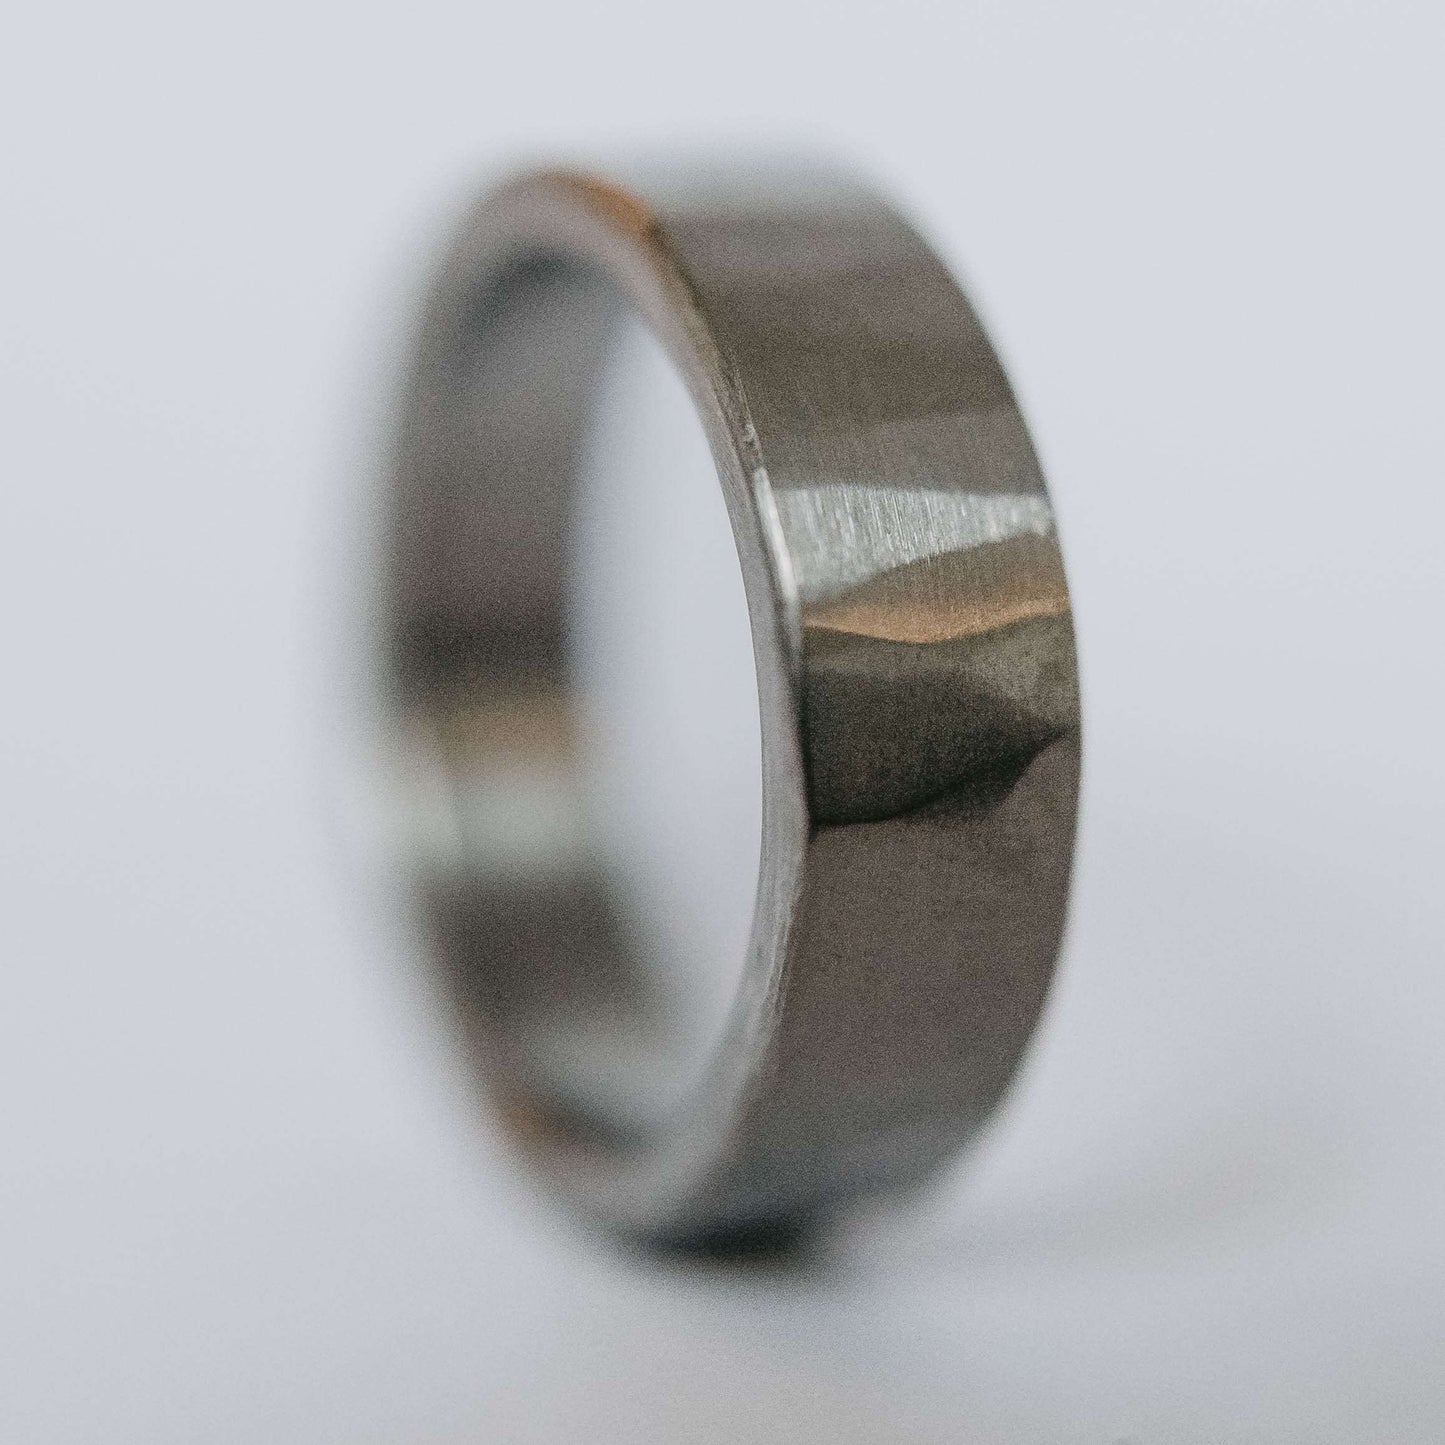 Mens titanium wedding band. This photo shows a lightly faceted gray titanium ring. (Vertical with white background)